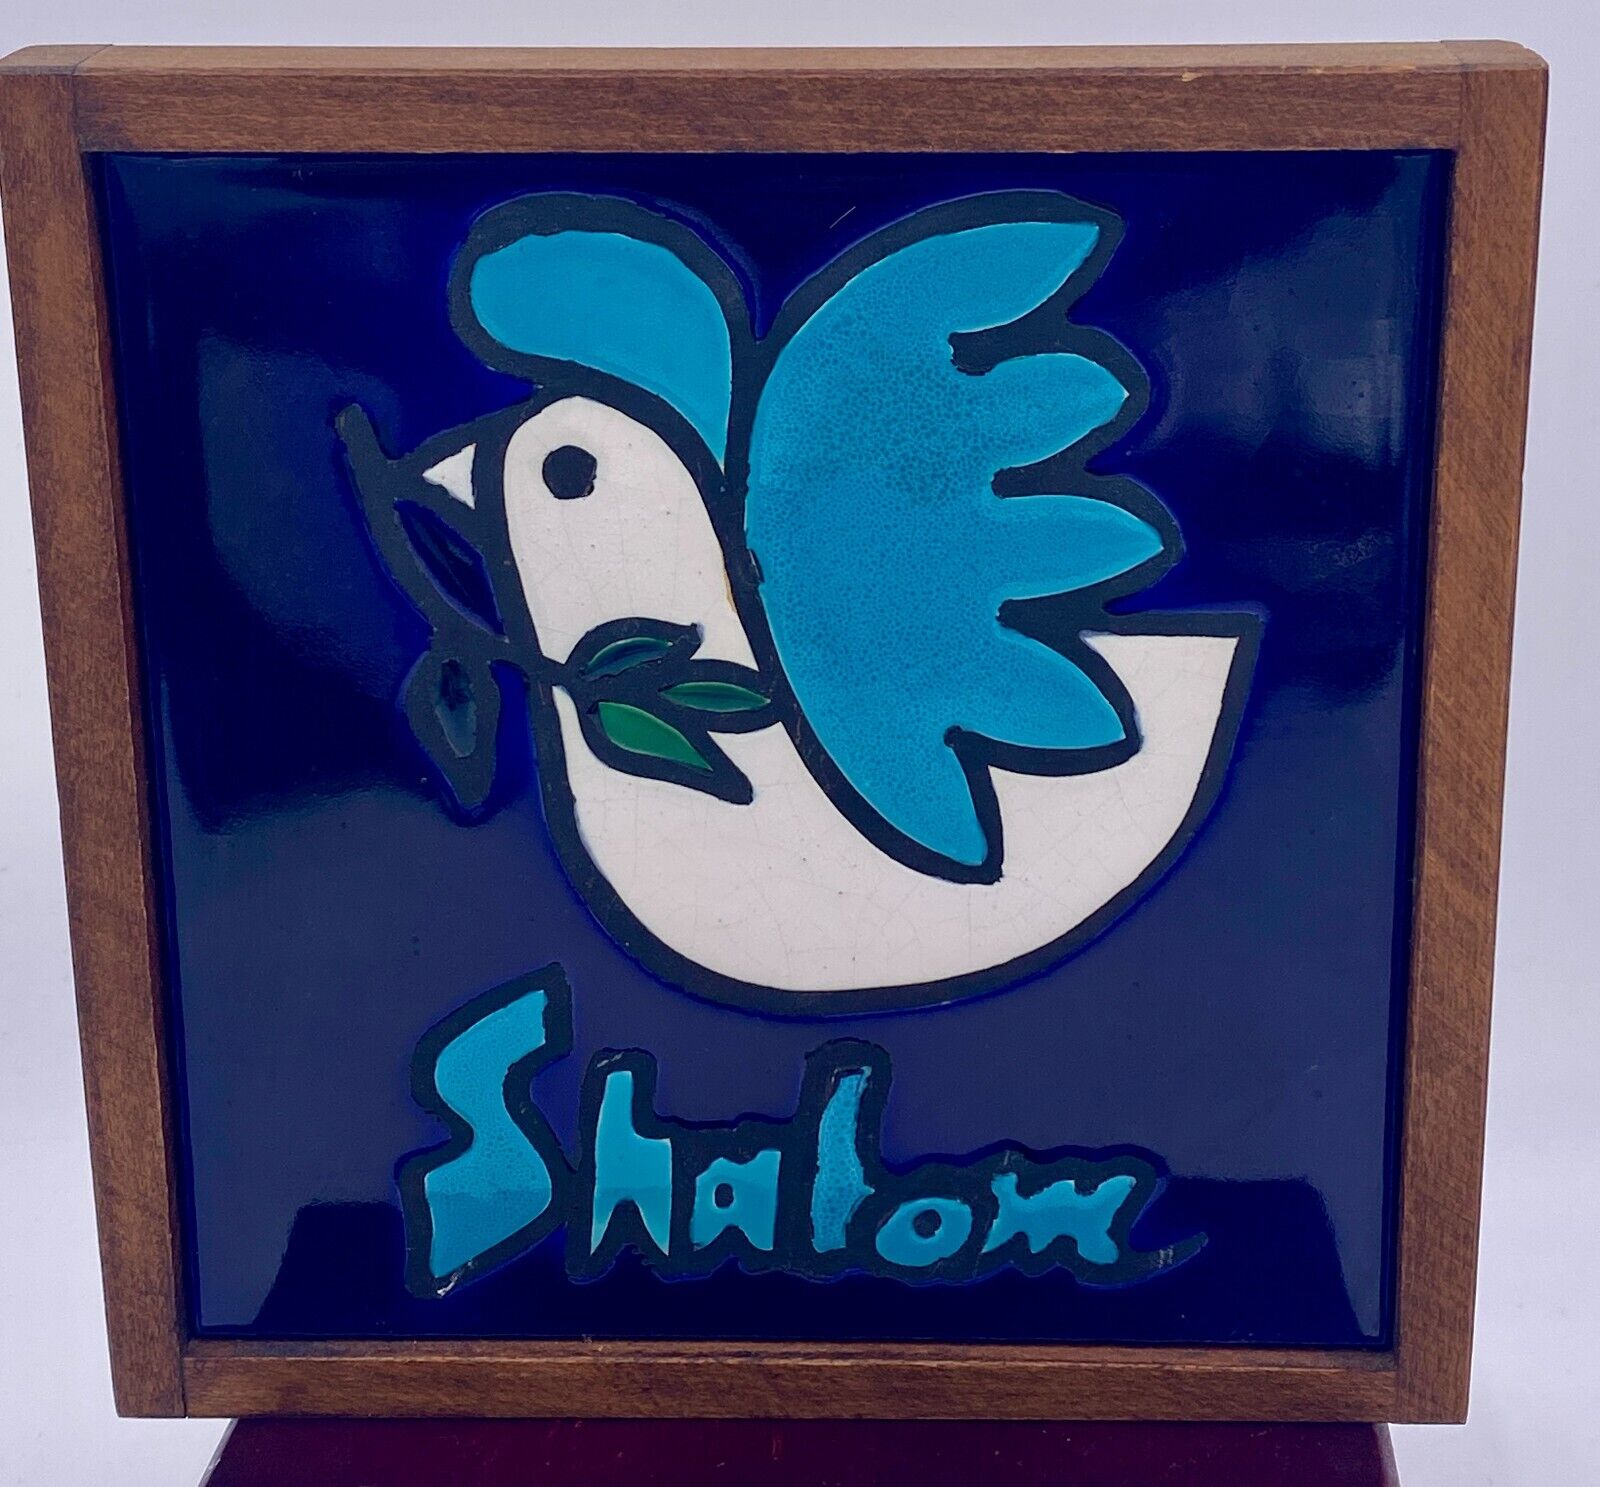 Shalom Peace Pottery Tile Ein Reb Art Ceramic Wooden Frame Judaica Made Israel